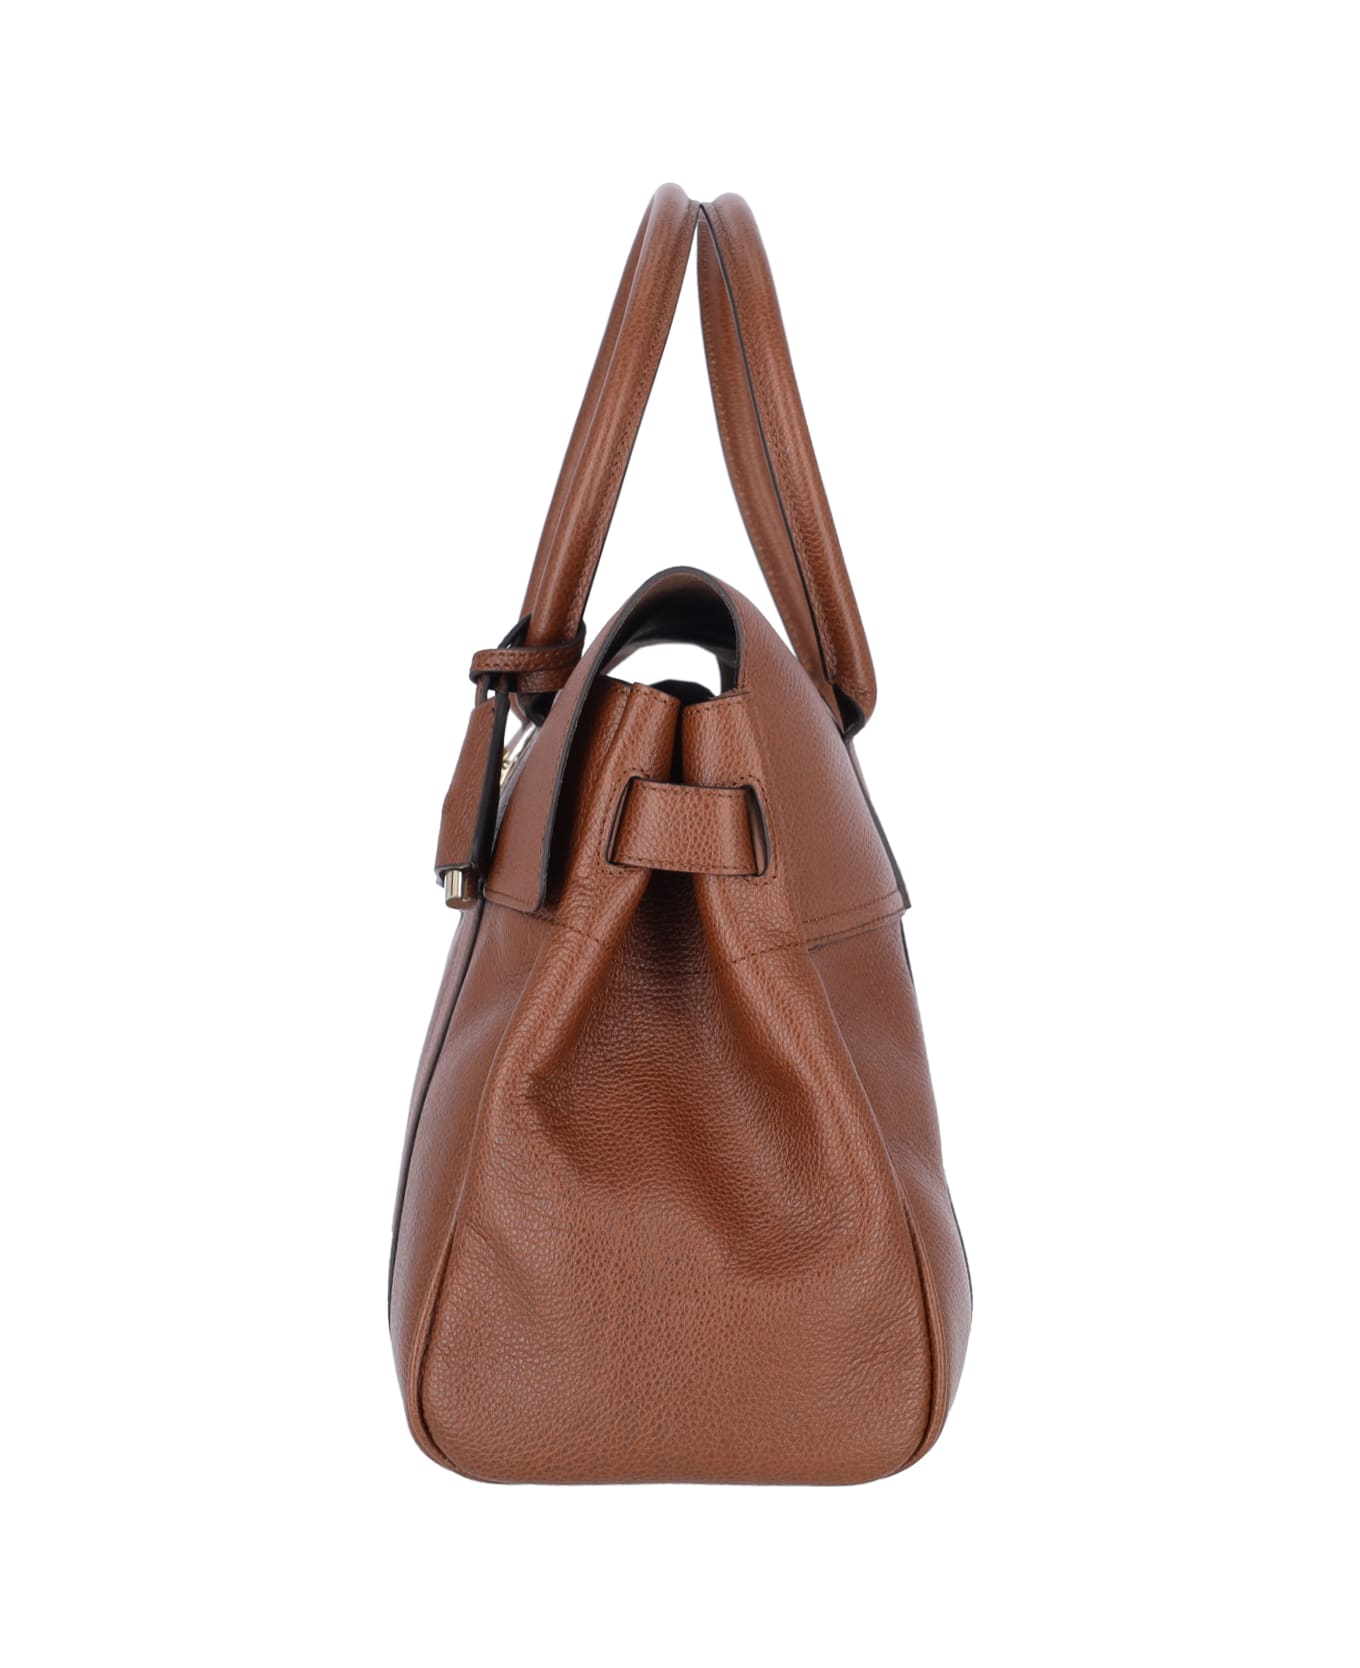 Mulberry Tote | italist